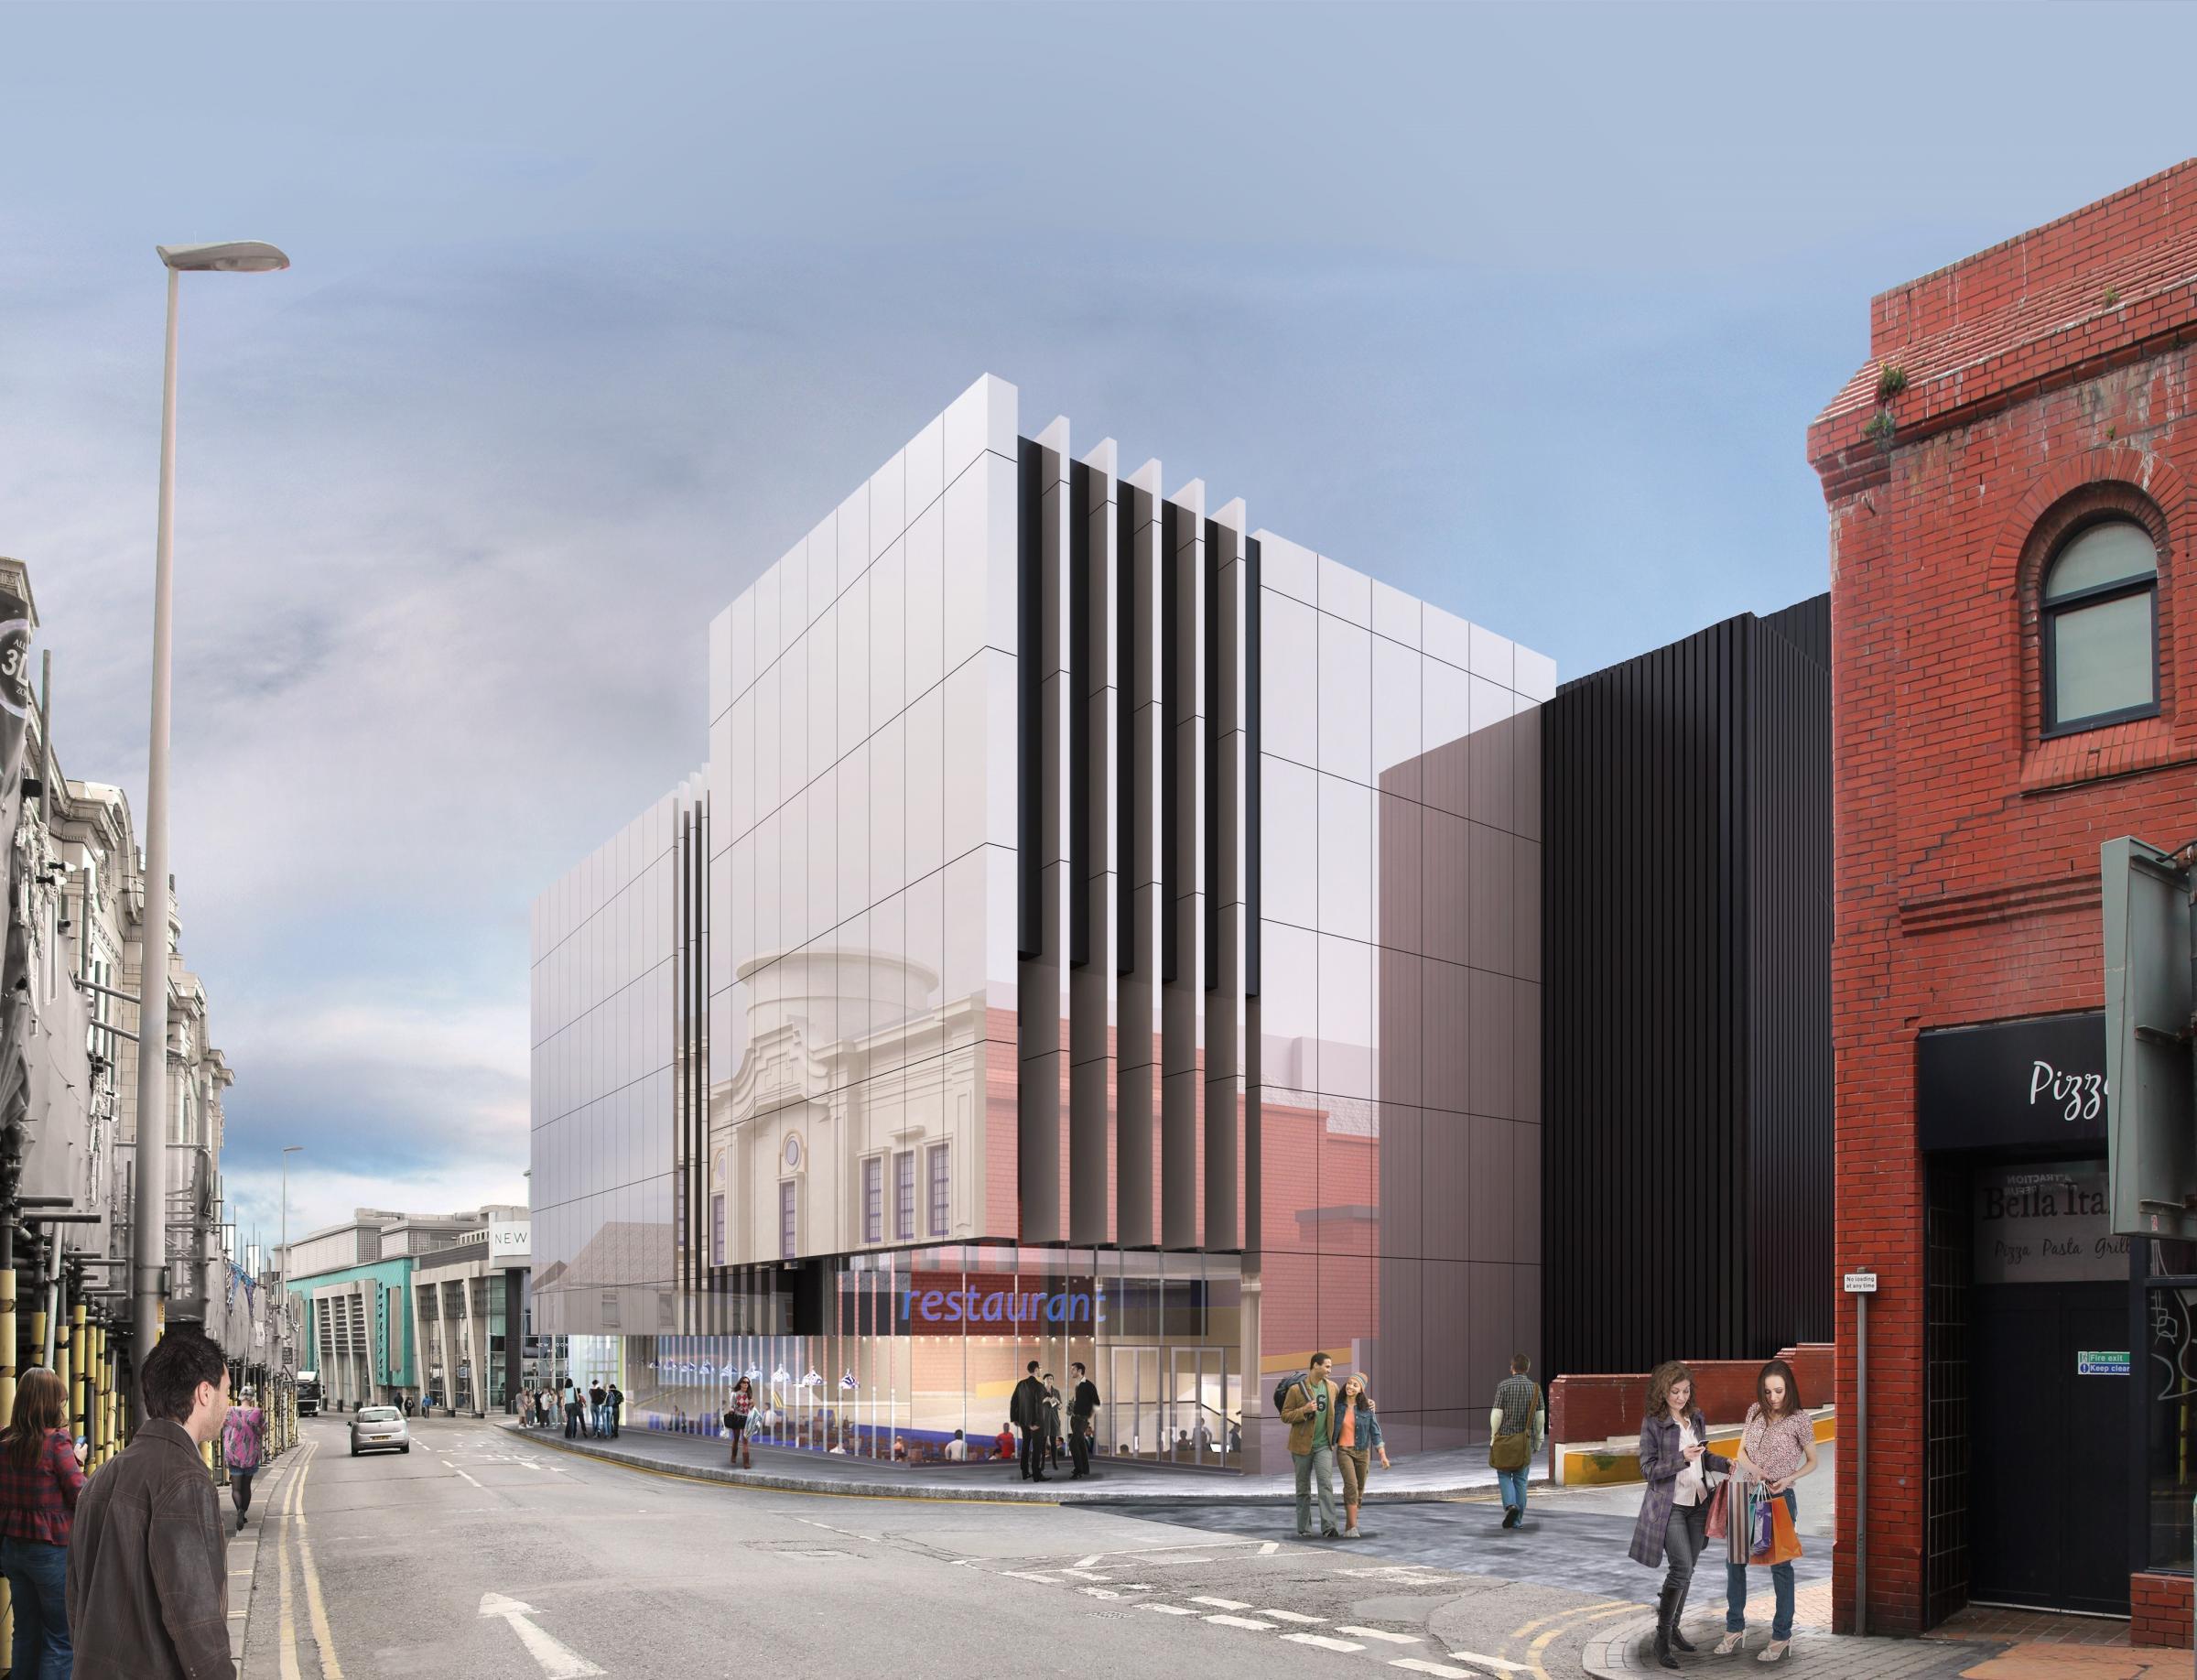 Work will begin in March to build the £20m second phase of the Houndshill Shopping Centre after a deal was signed for an IMAX-style multi-media entertainment centre